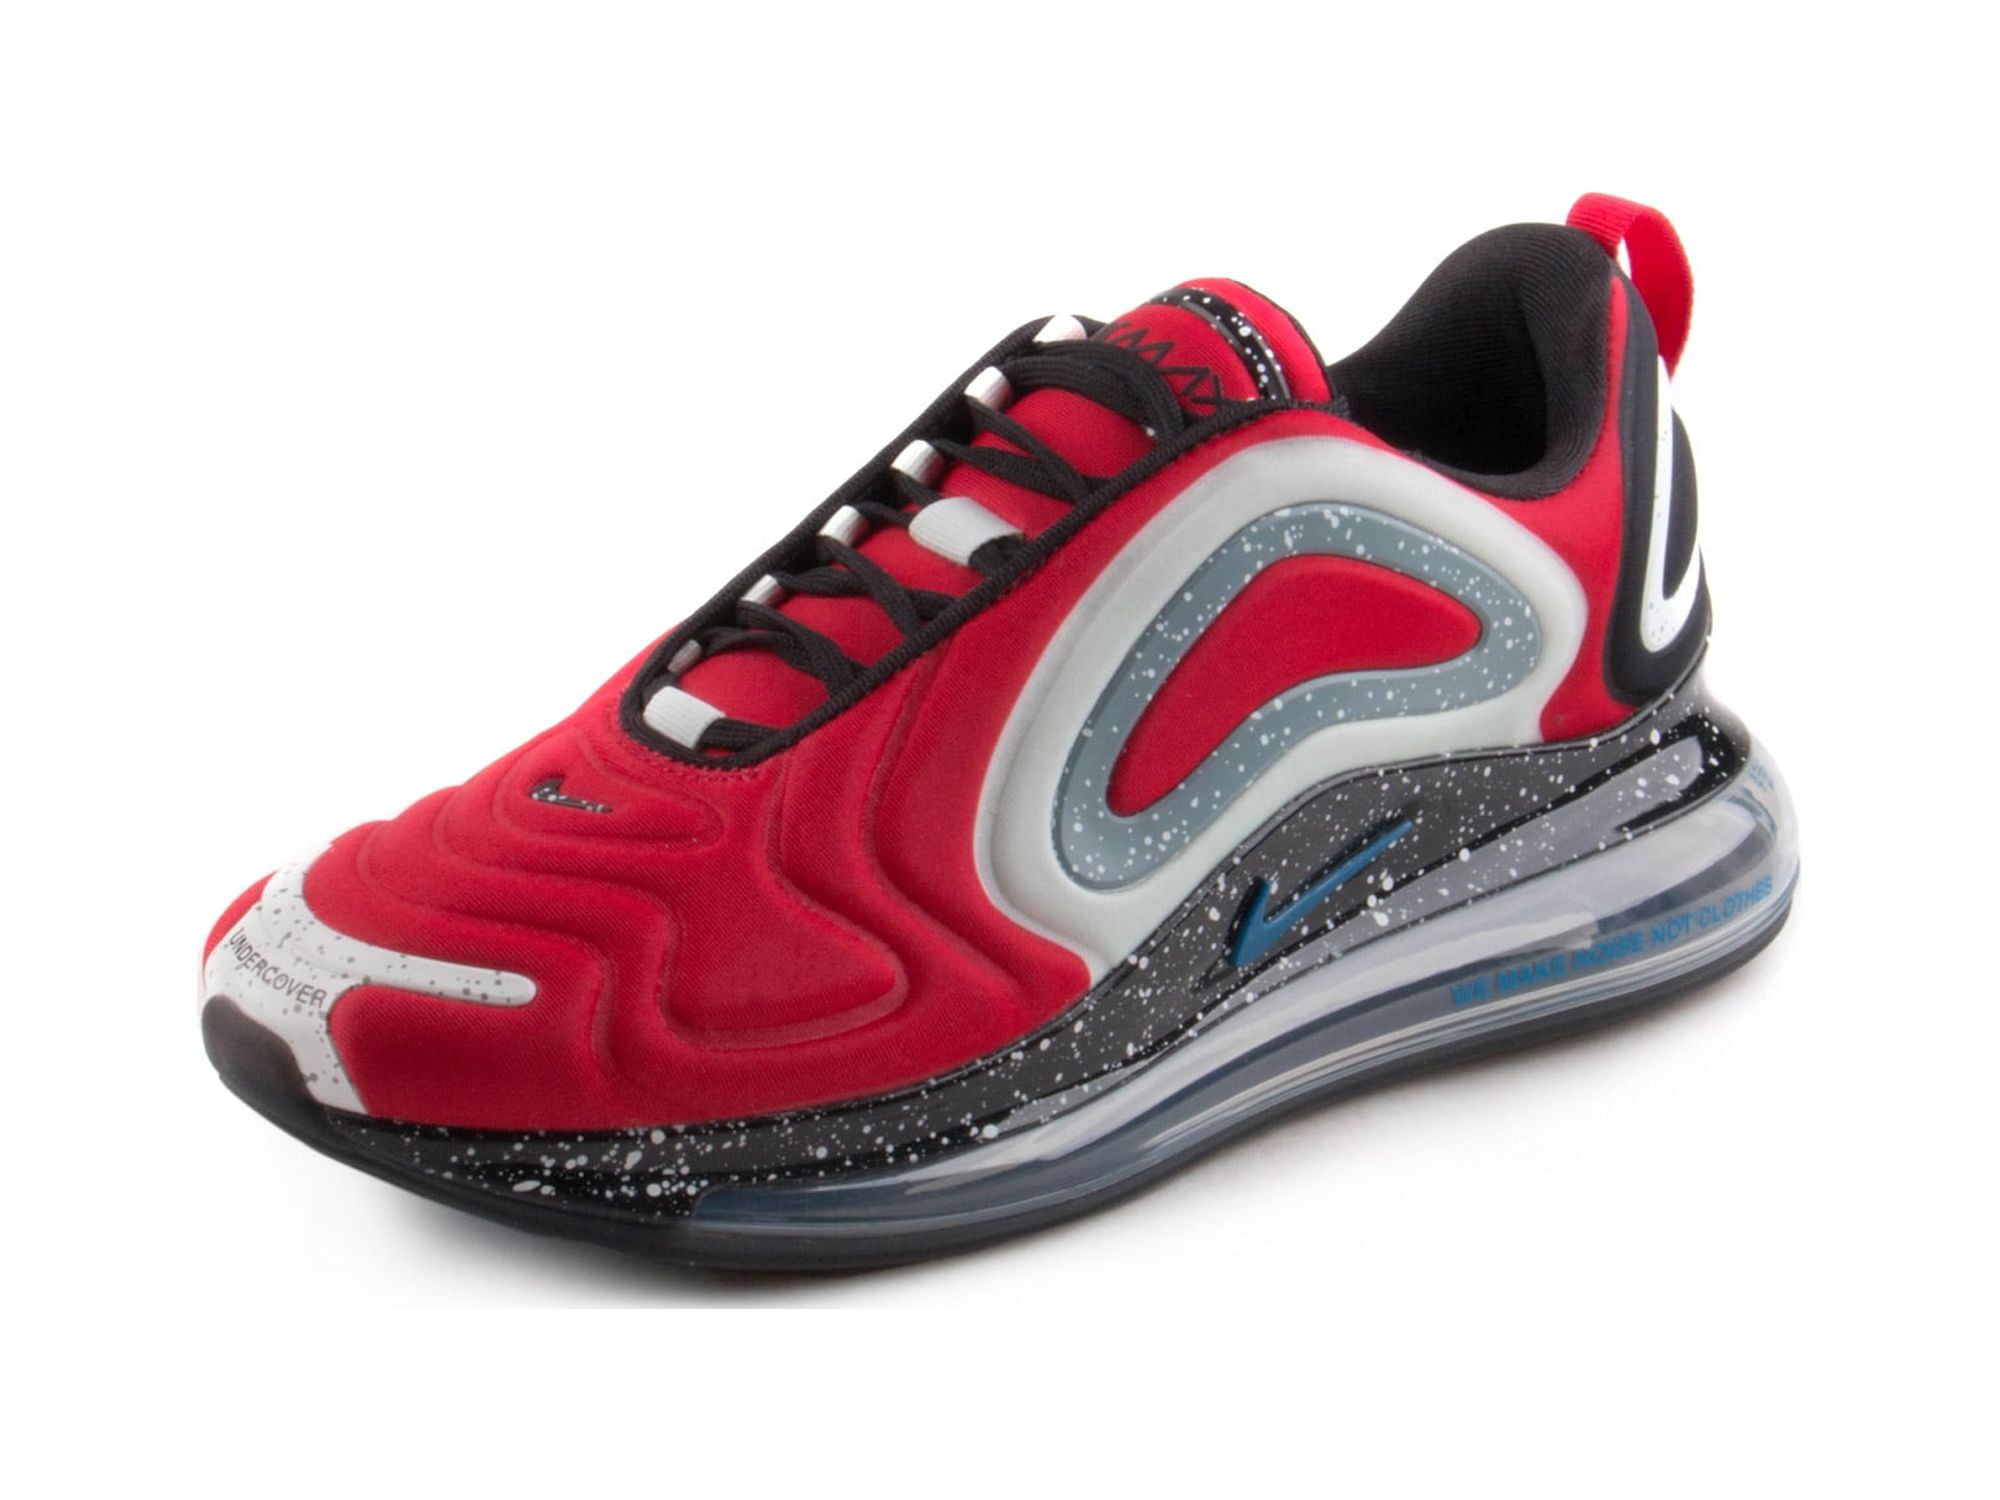 Nike Mens Air Max 720/ Undercover University Red/Blue Jay CN2408-600